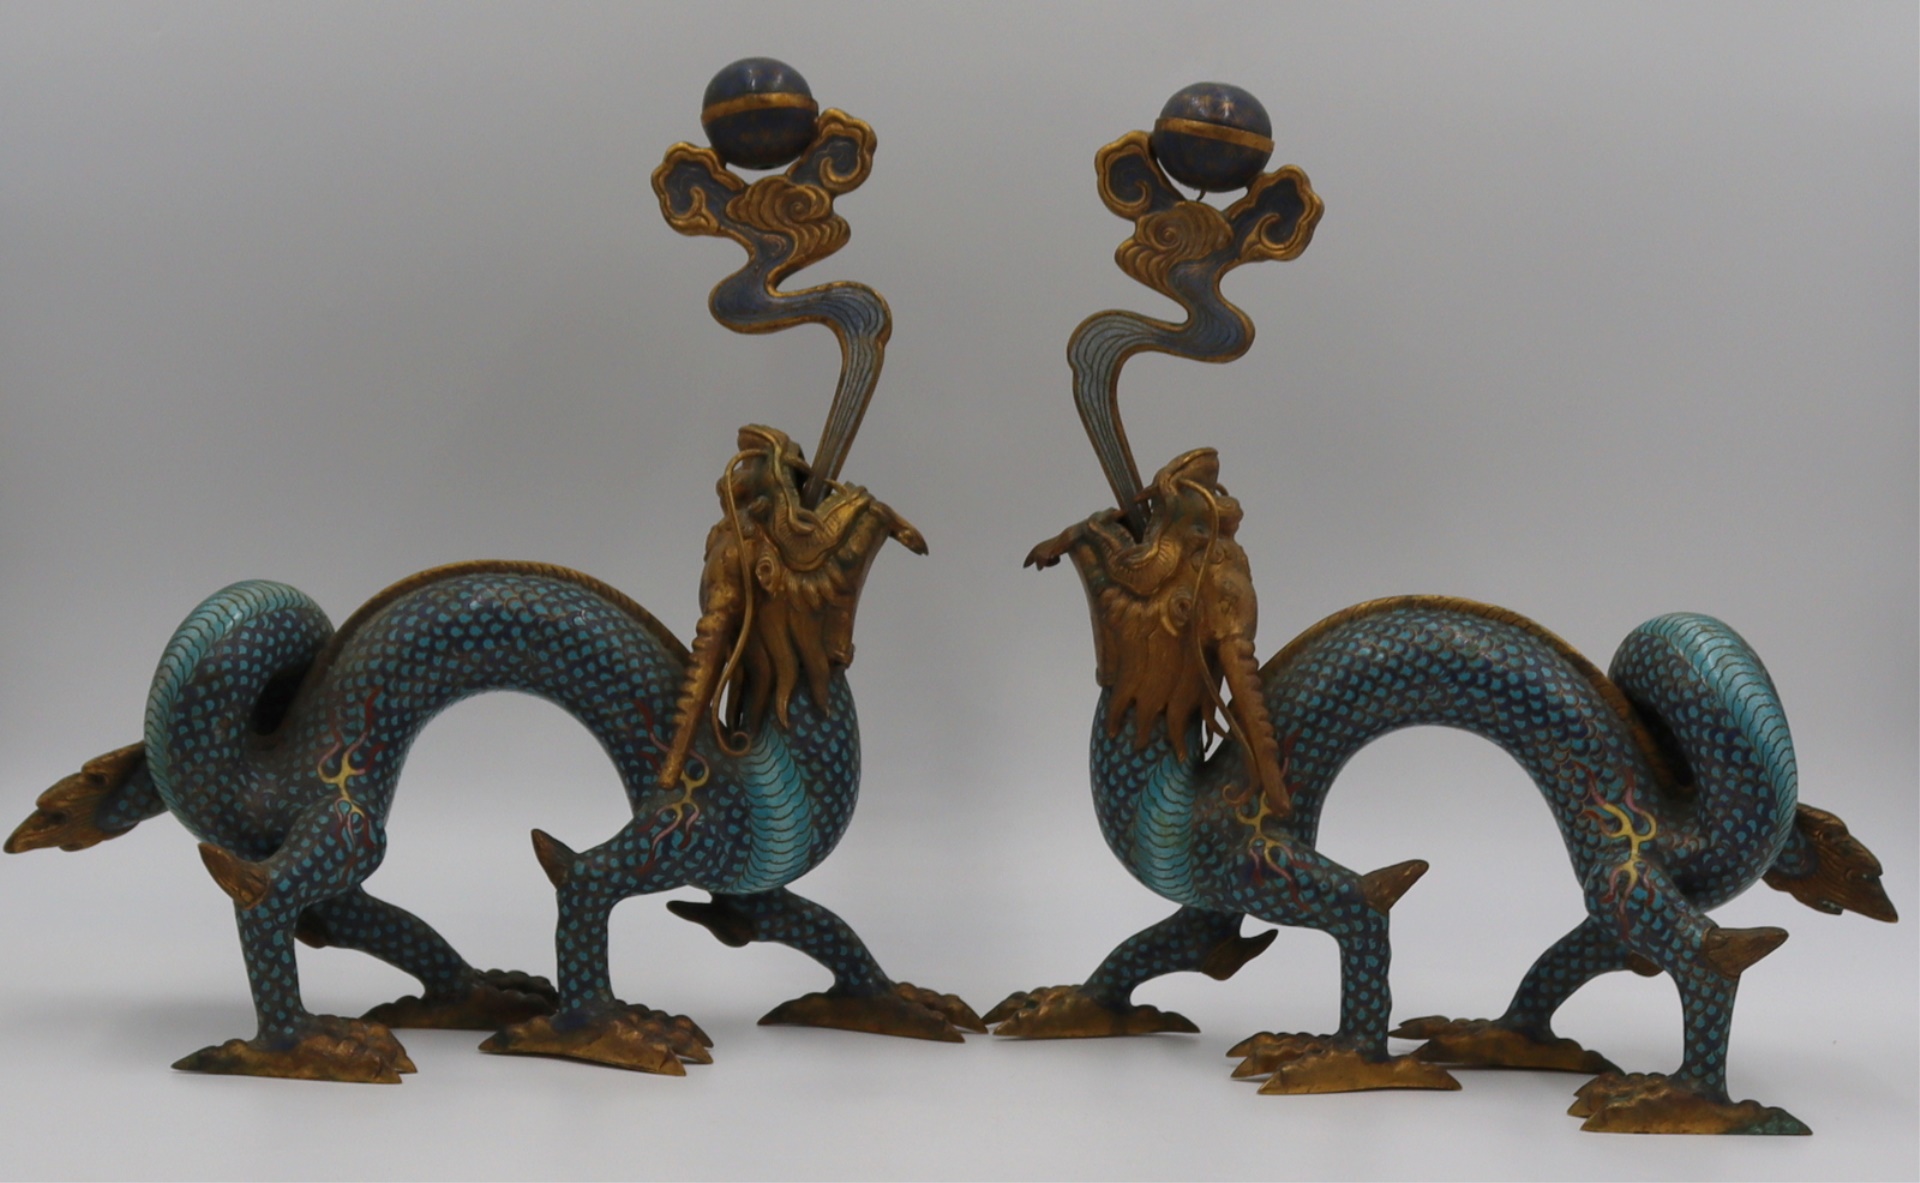 PAIR OF CHINESE CLOISONNE DRAGON 3be30d